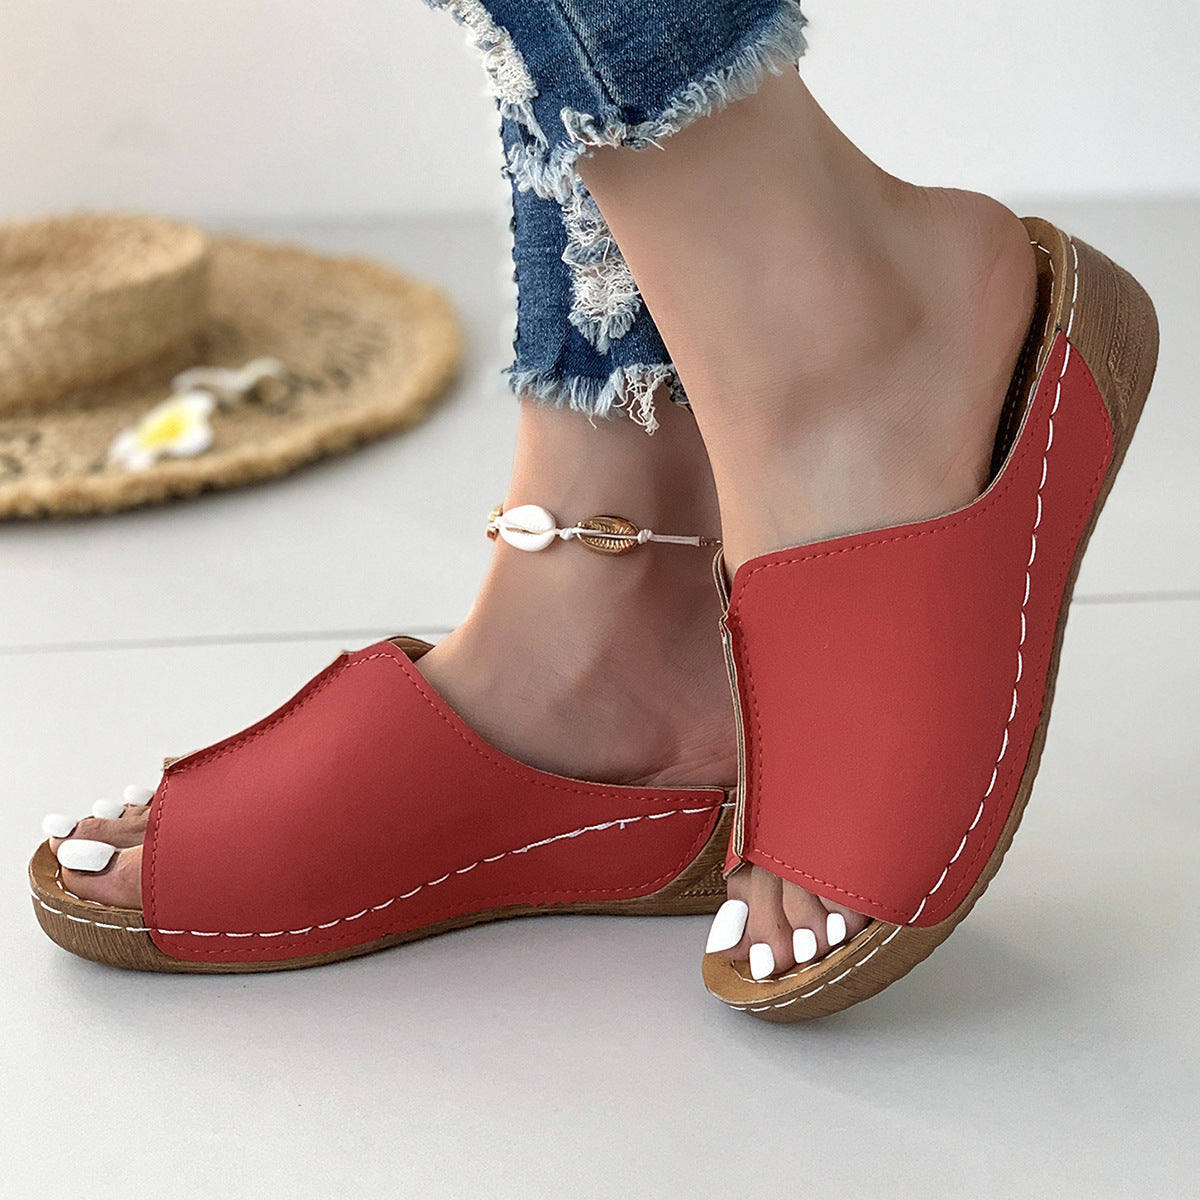 Summer Wedge Women's Slippers Plus Size Casual Fashion Simple Platform